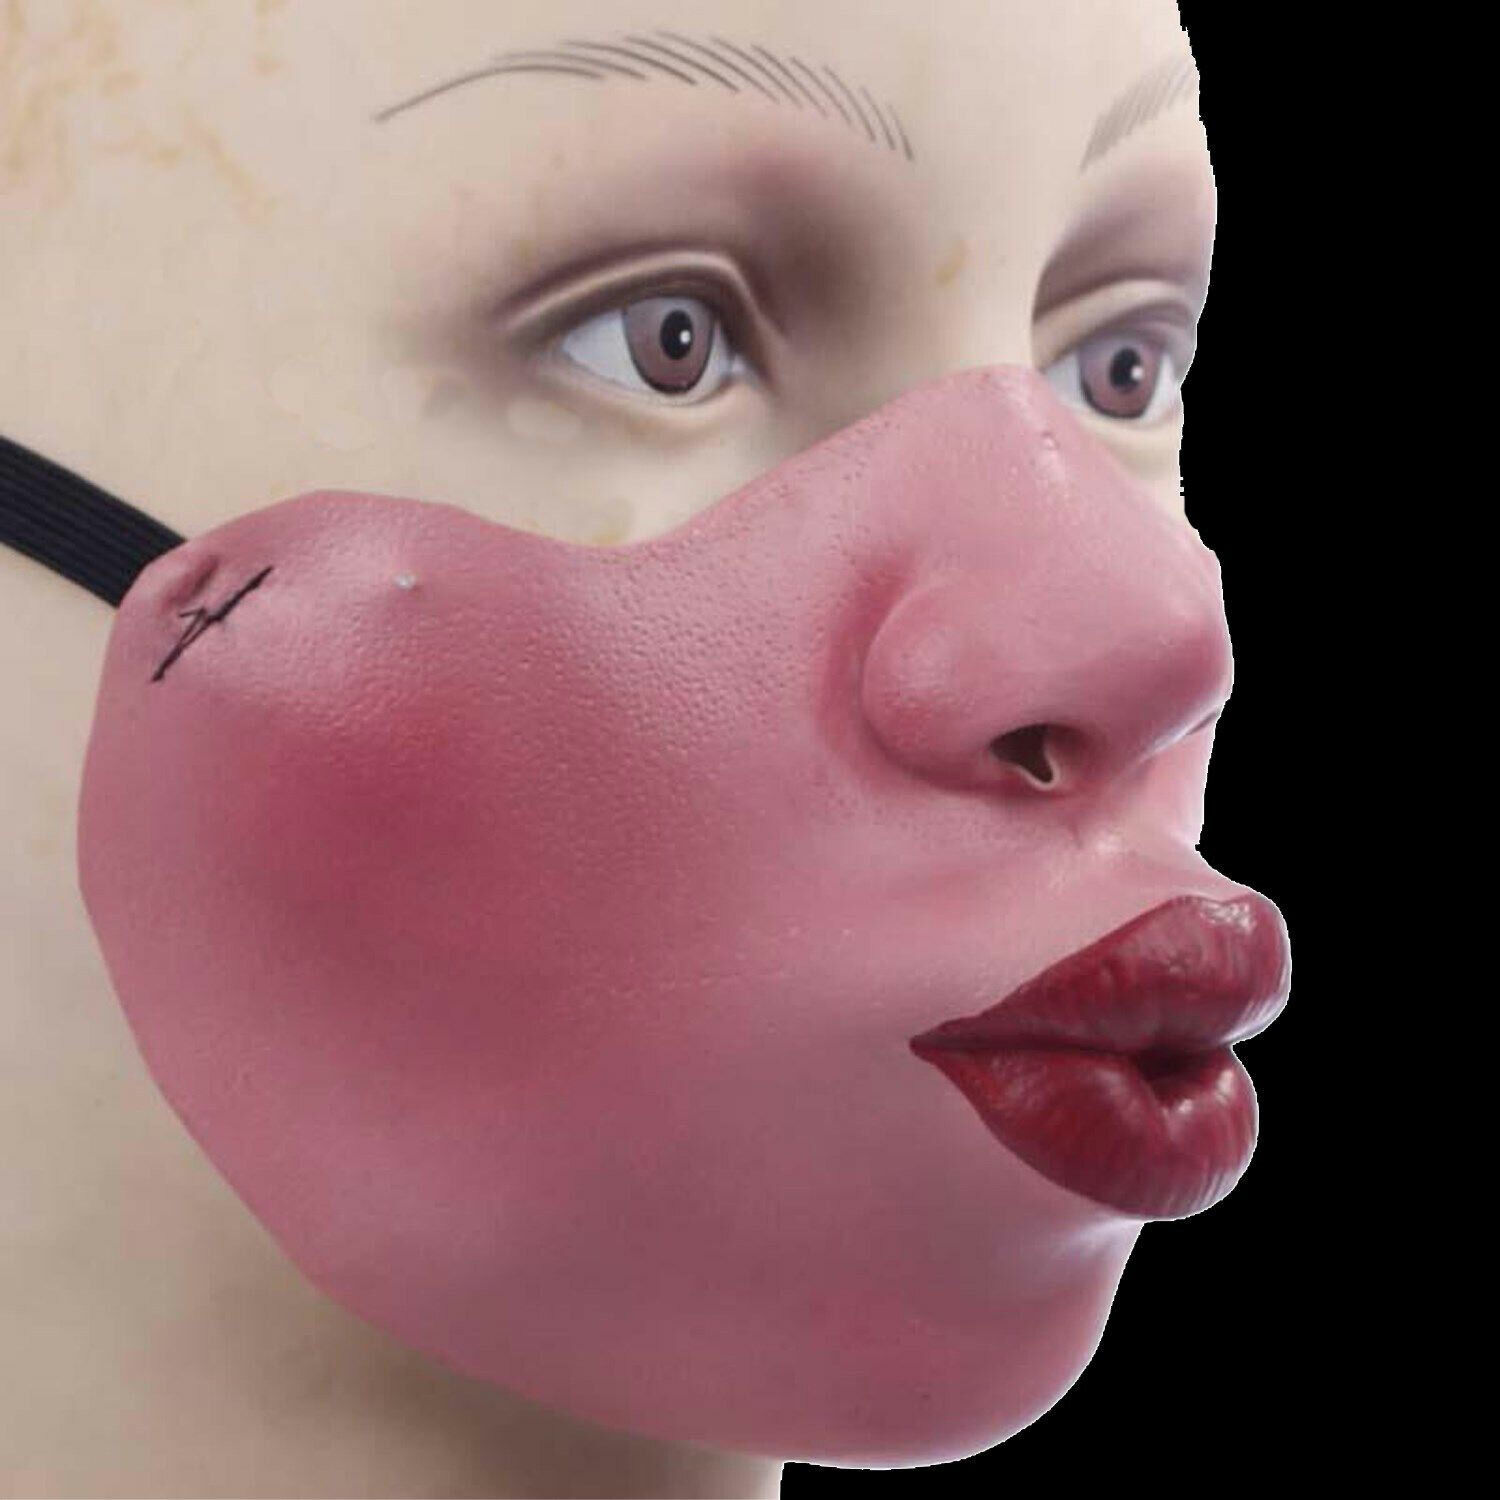 Funny Gag HALF FACE MASK Mouth Cover Cosplay Halloween Costume Mardi Gras -KISSY